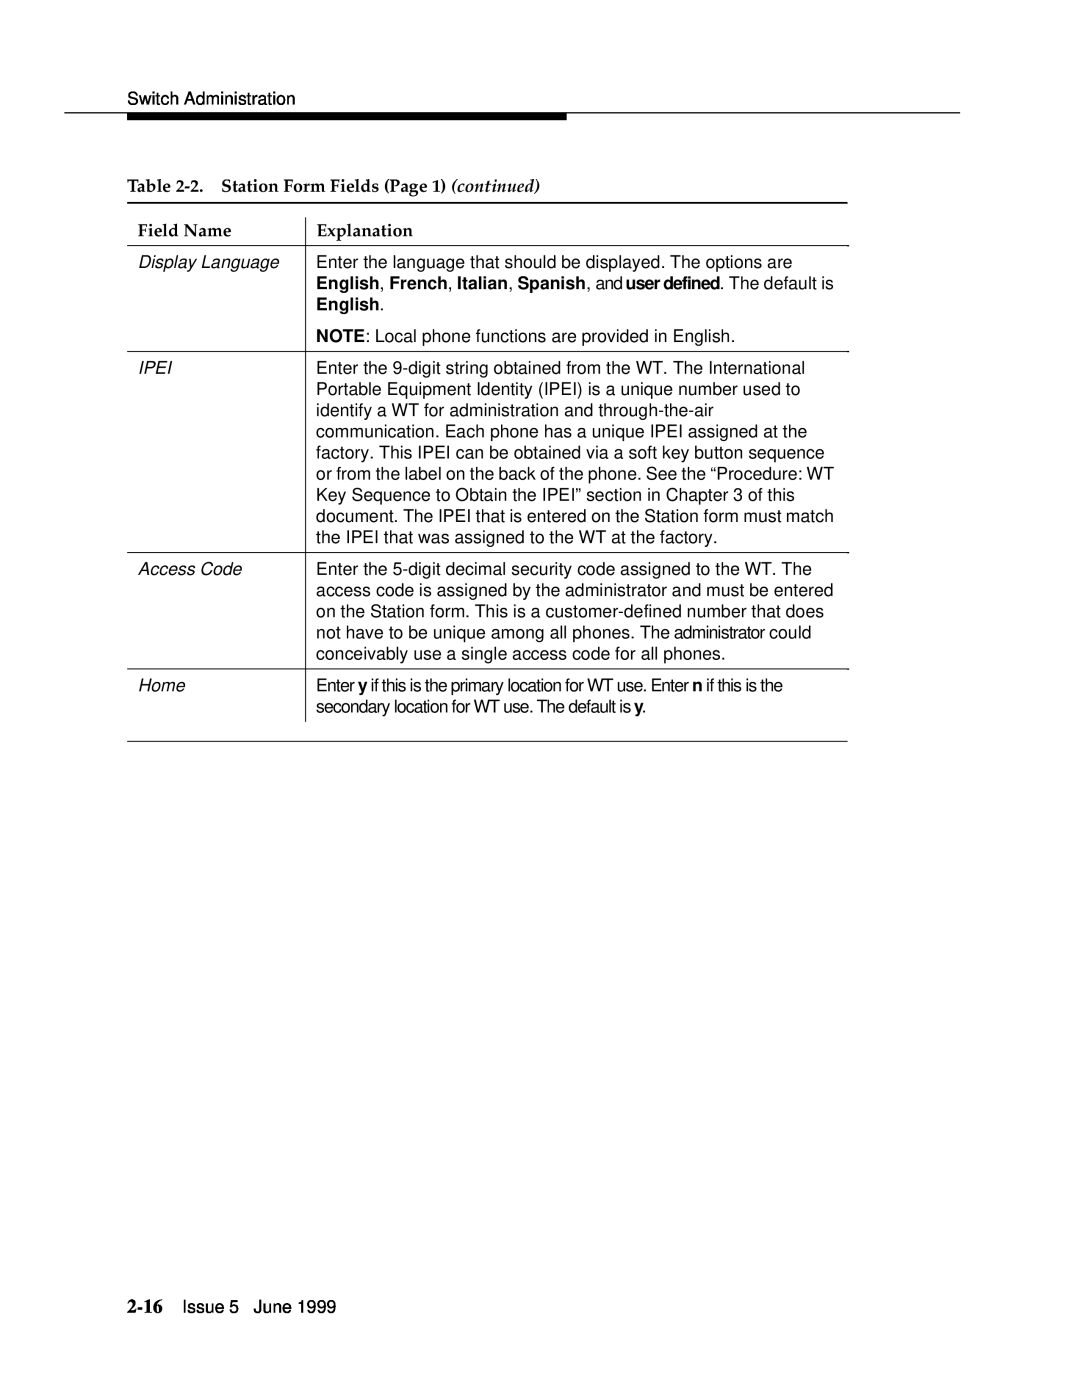 Lucent Technologies 555-232-102 manual 2. Station Form Fields Page 1 continued, English, Field Name, Explanation 